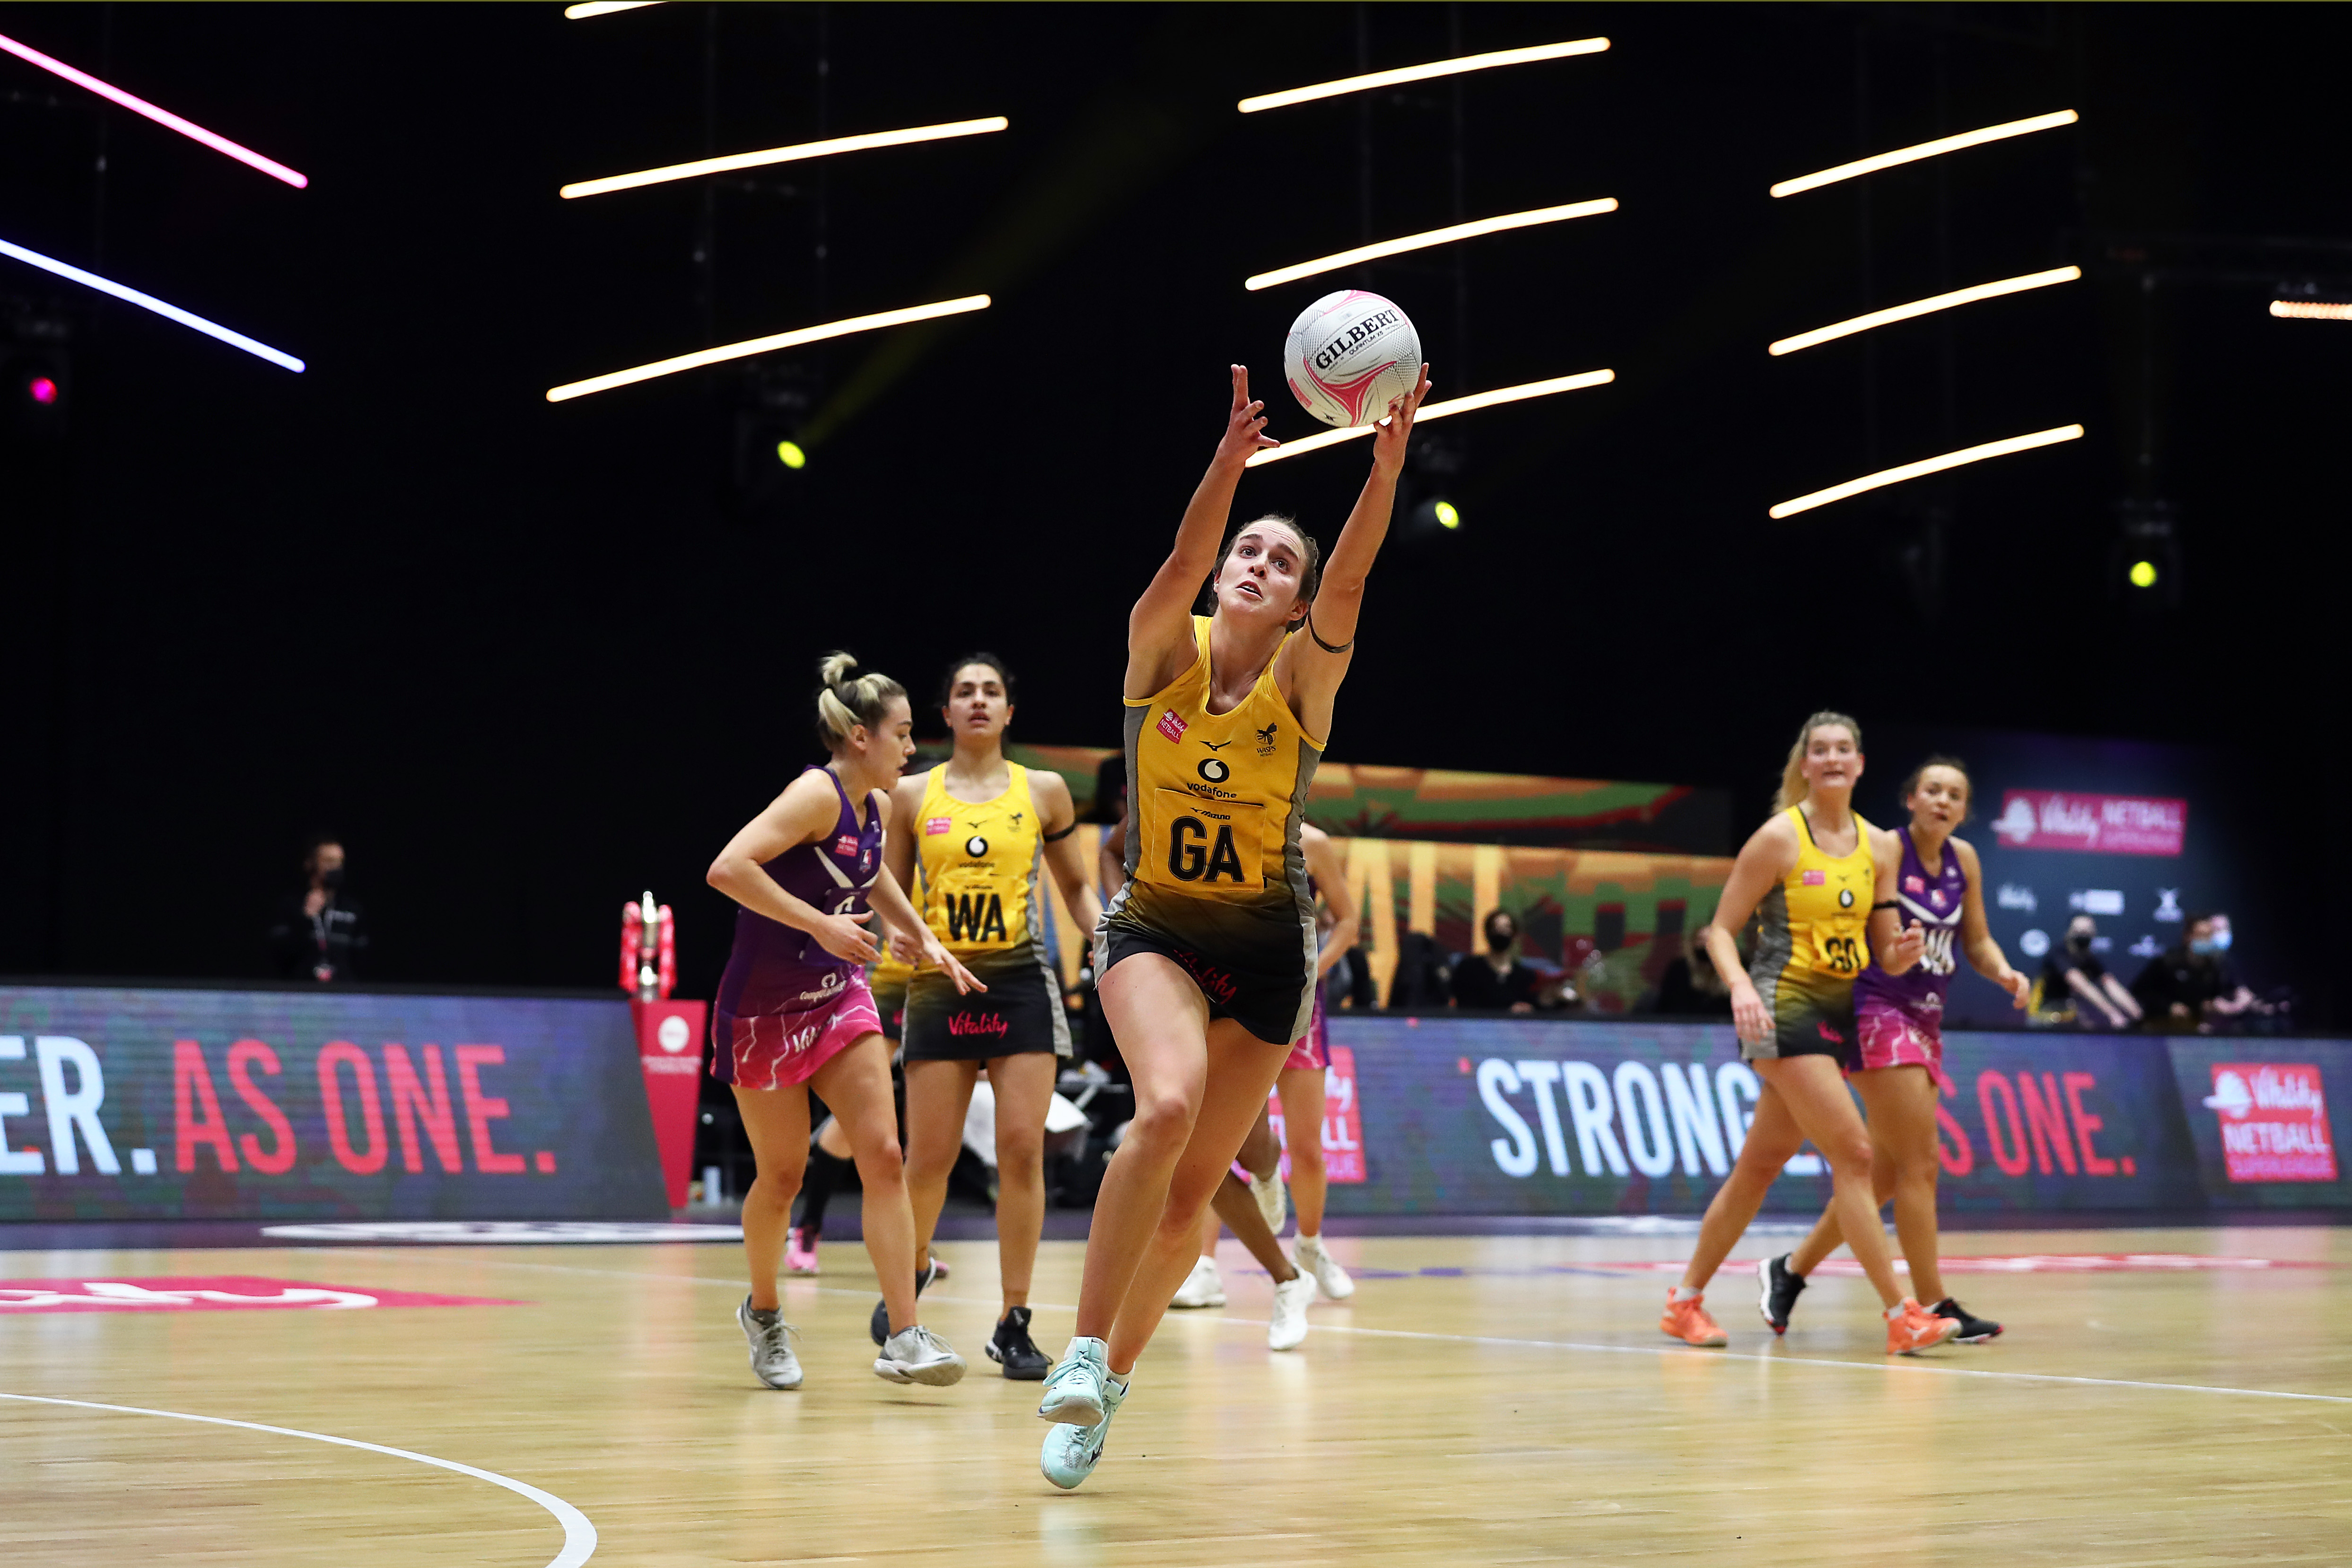 <p>WAKEFIELD, ENGLAND - FEBRUARY 15: Katie Harris of Wasps Netball jumps for the ball during the match between Loughborough Lightning and Wasps Netball on day four of the Vitality Netball Superleague Season Opener at Studio 001 on February 15, 2021 in Wakefield, England. (Photo by Jan Kruger/Getty Images for Vitality Netball Superleague)</p>
